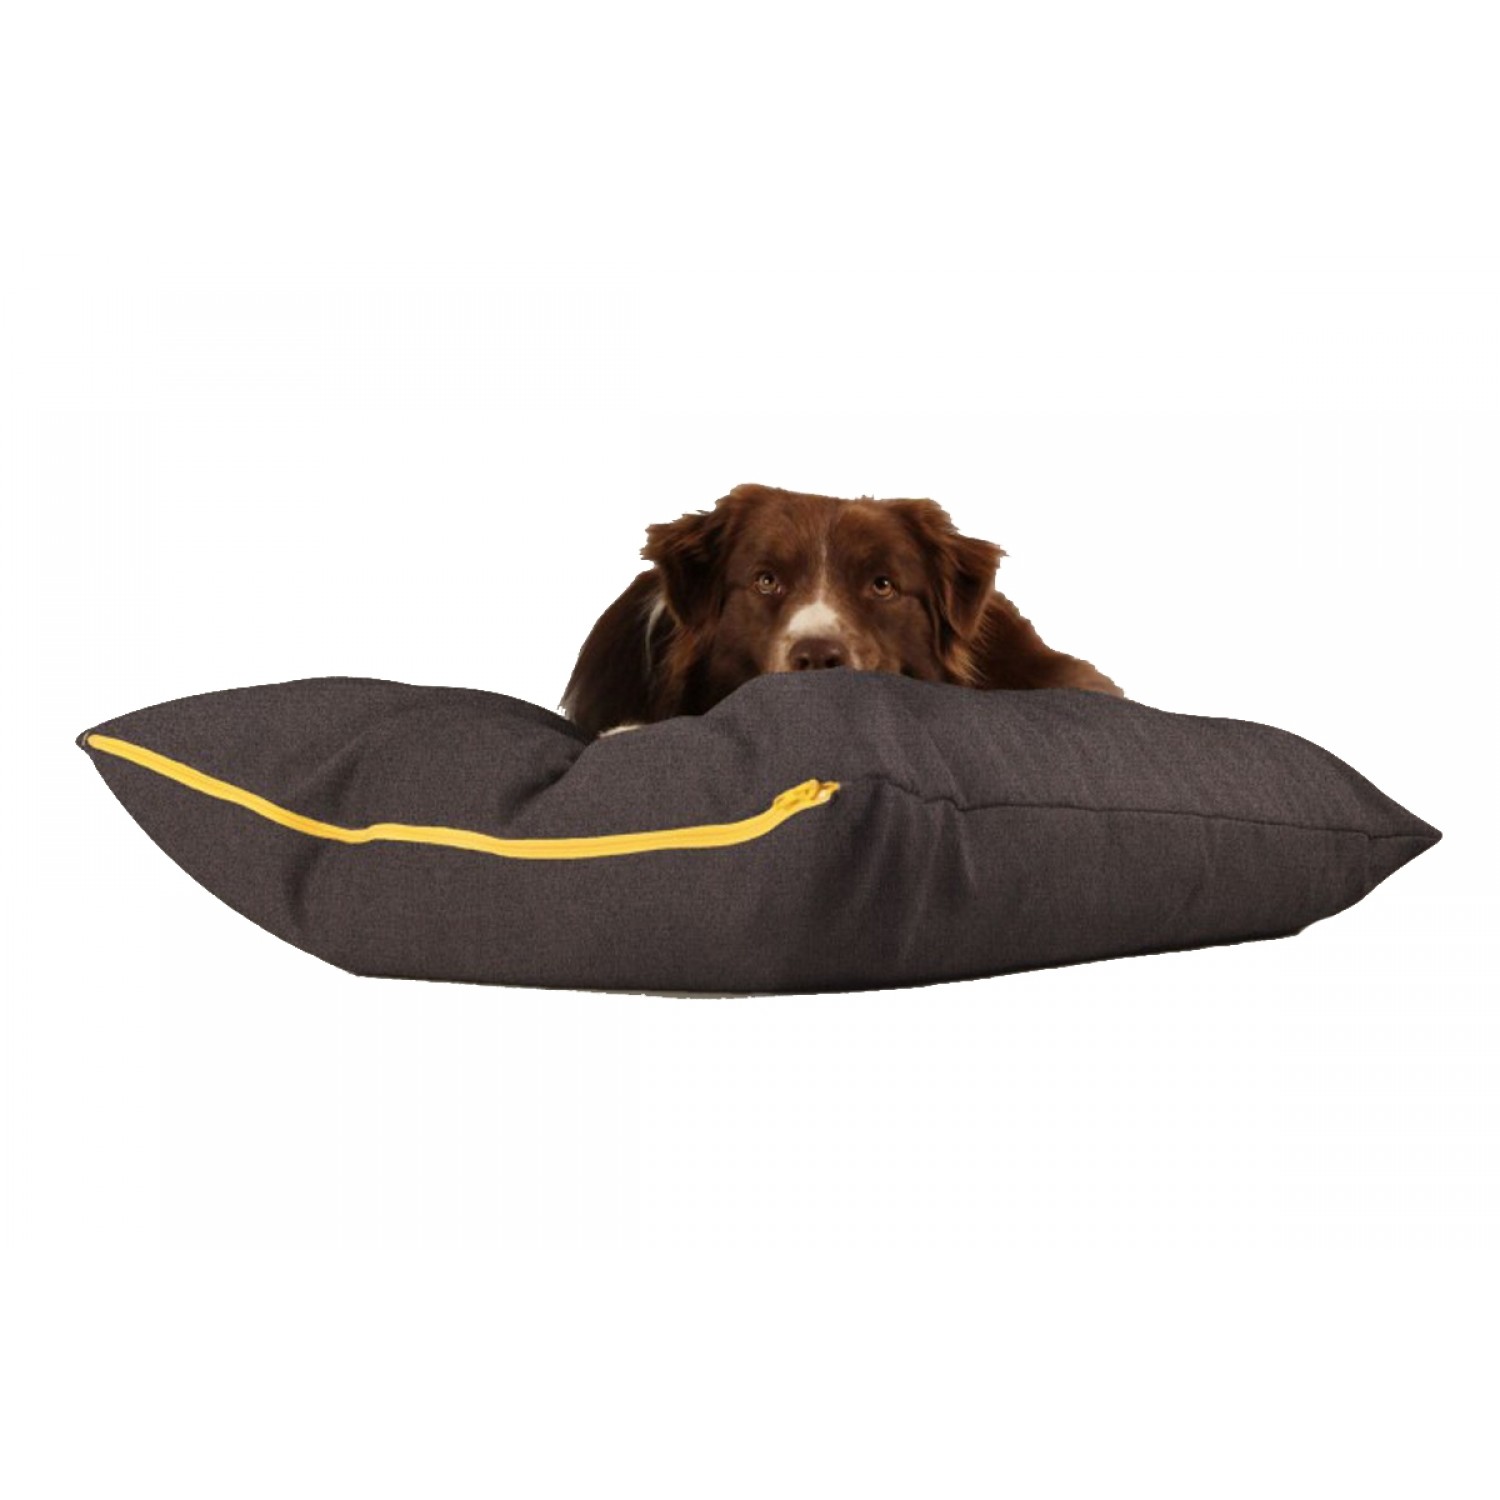 BUDDY Dog Pillow brown/grey, sustainable resting place for dogs 